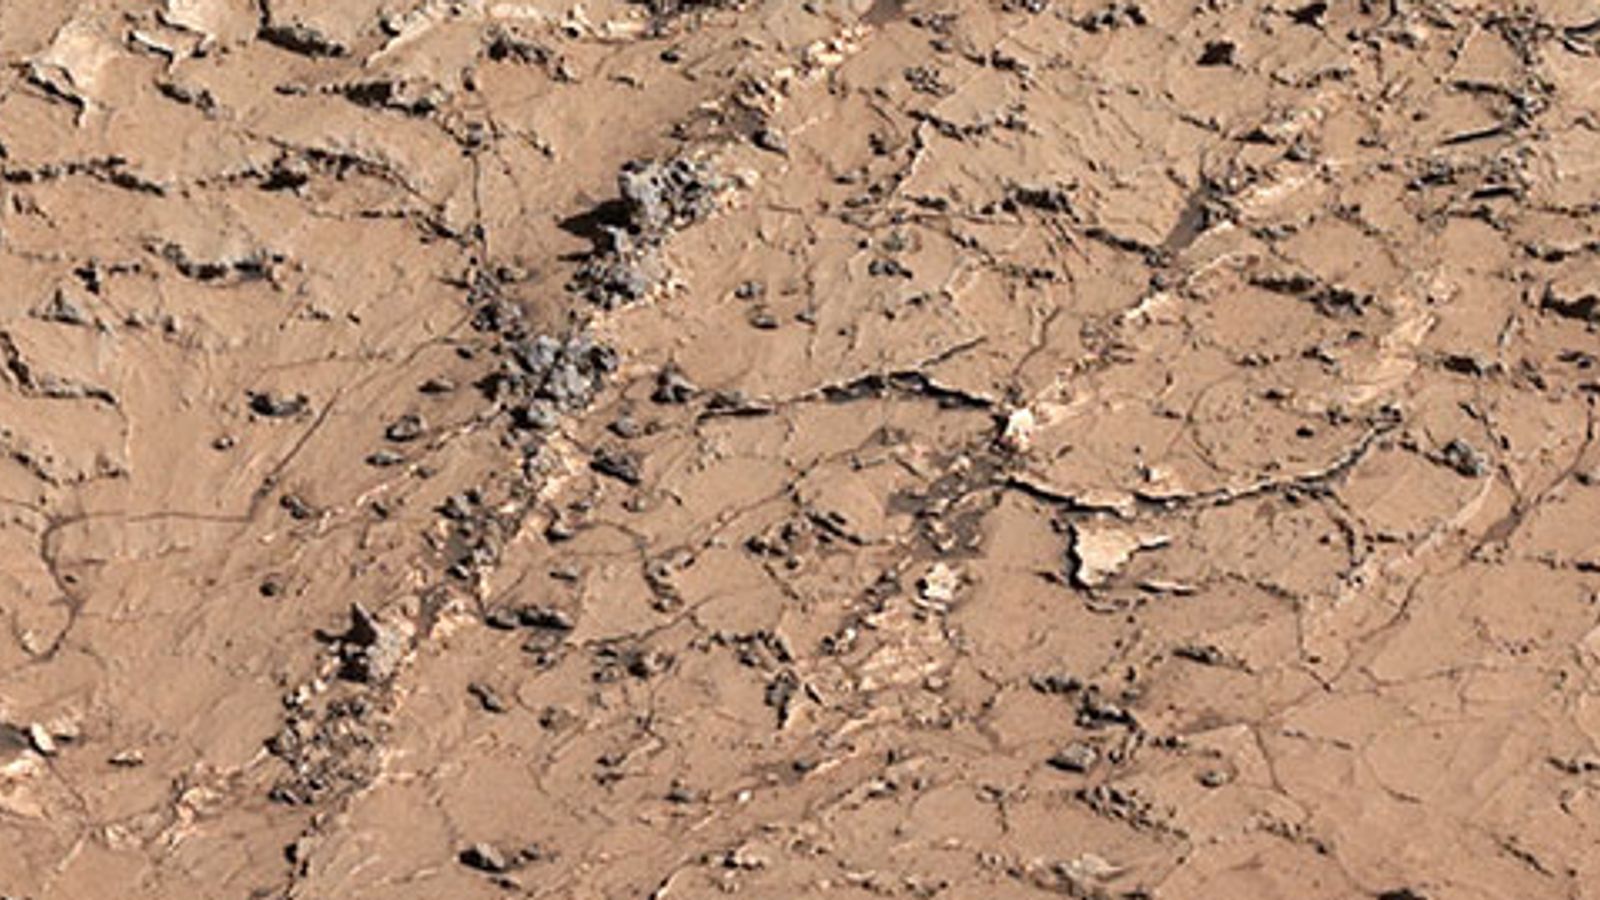 Ancient mud cracks on Mars point to conditions favorable for life, Science